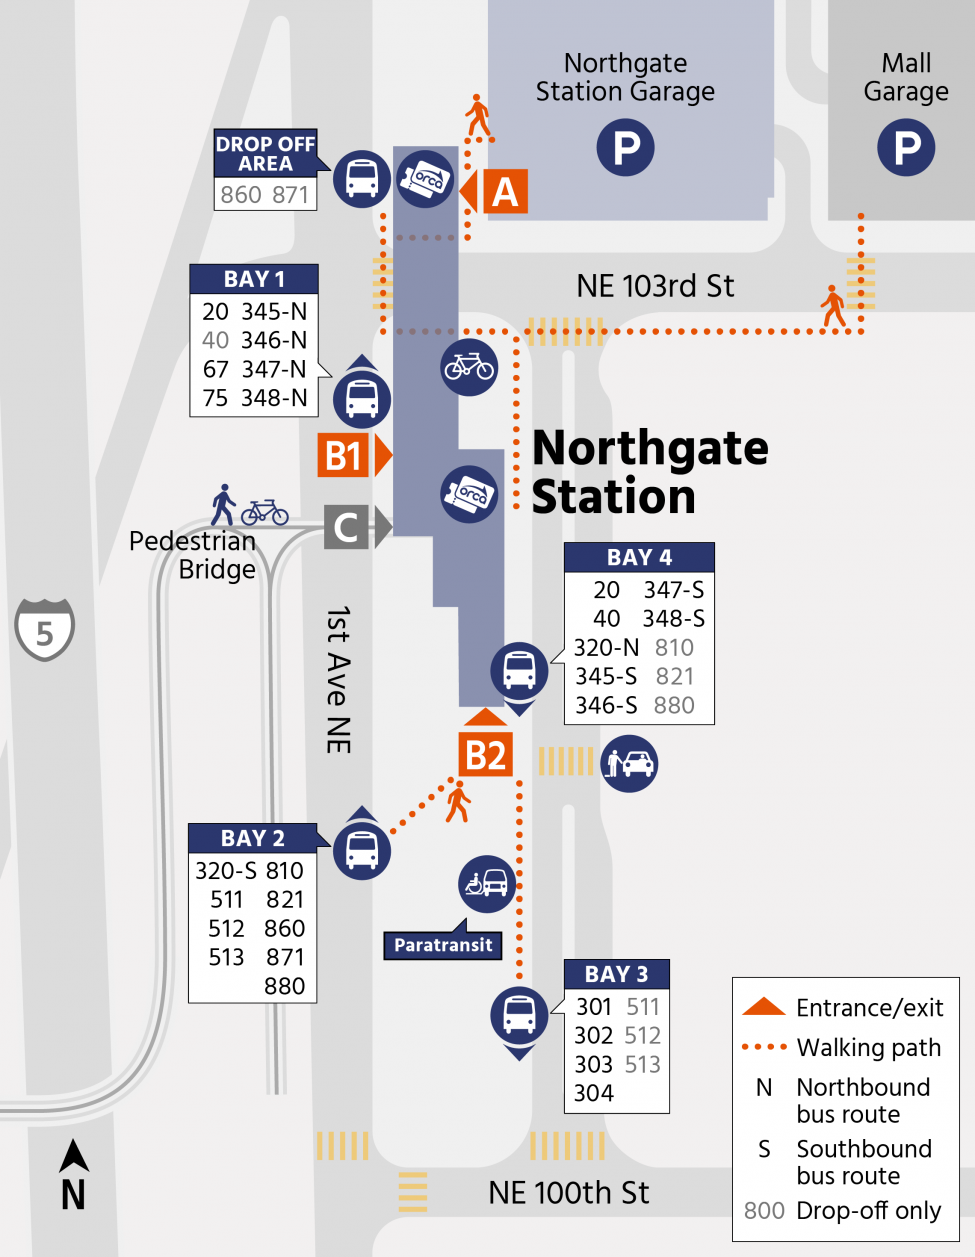 Map illustrating walking path for transfer from bus to link at the Northgate Station.